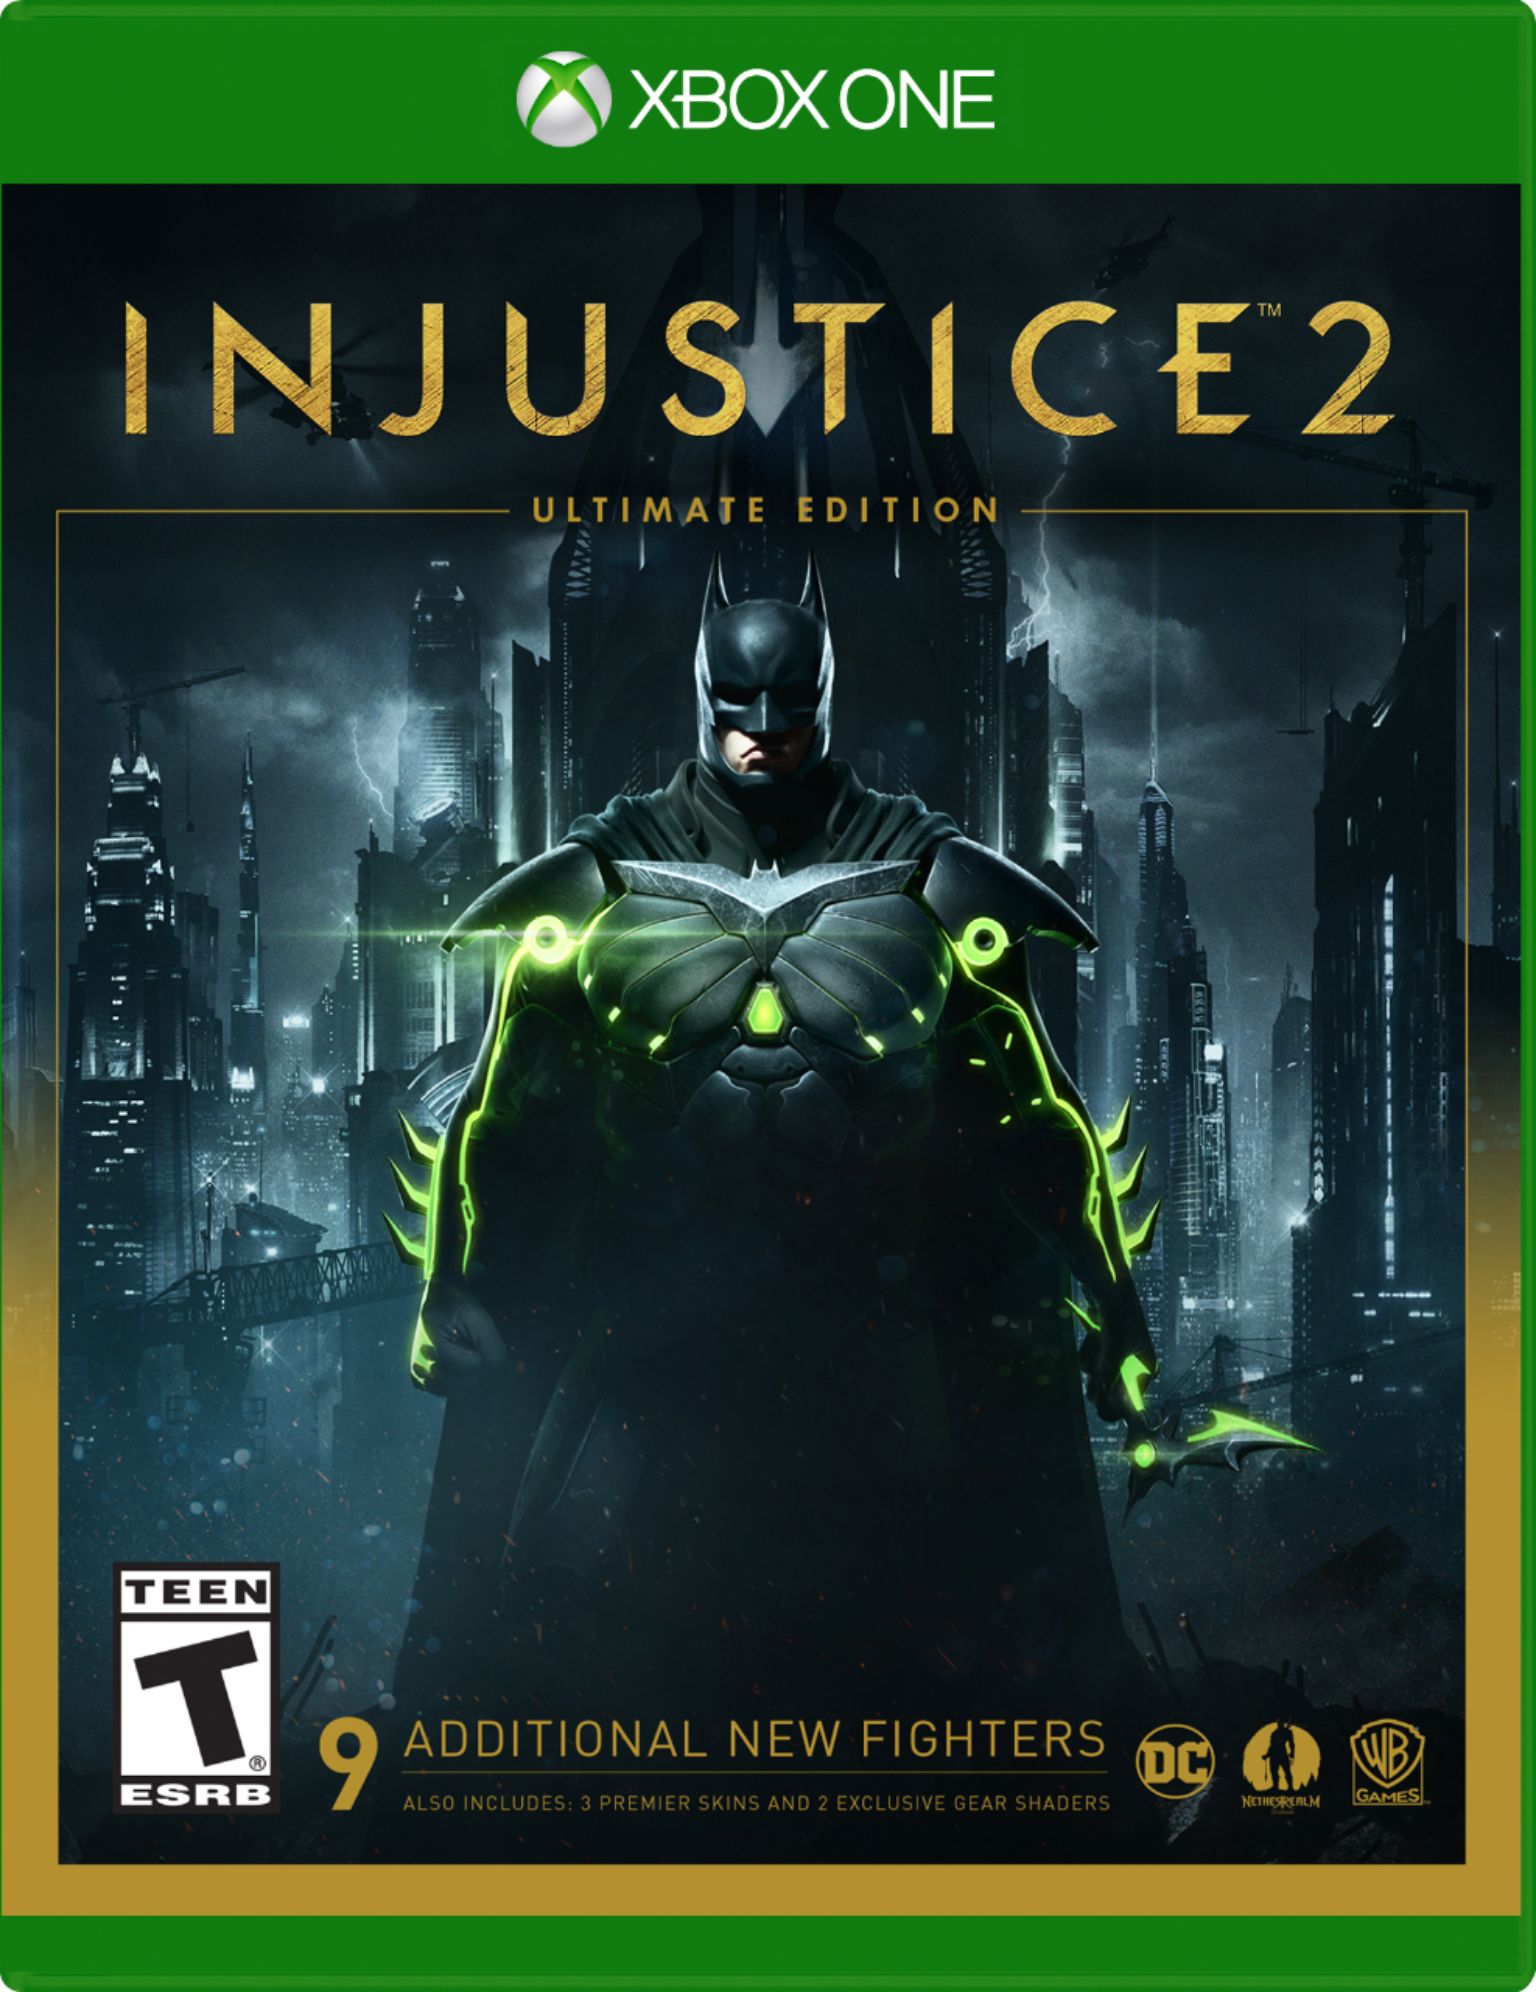 Injustice 2 players - Xbox one